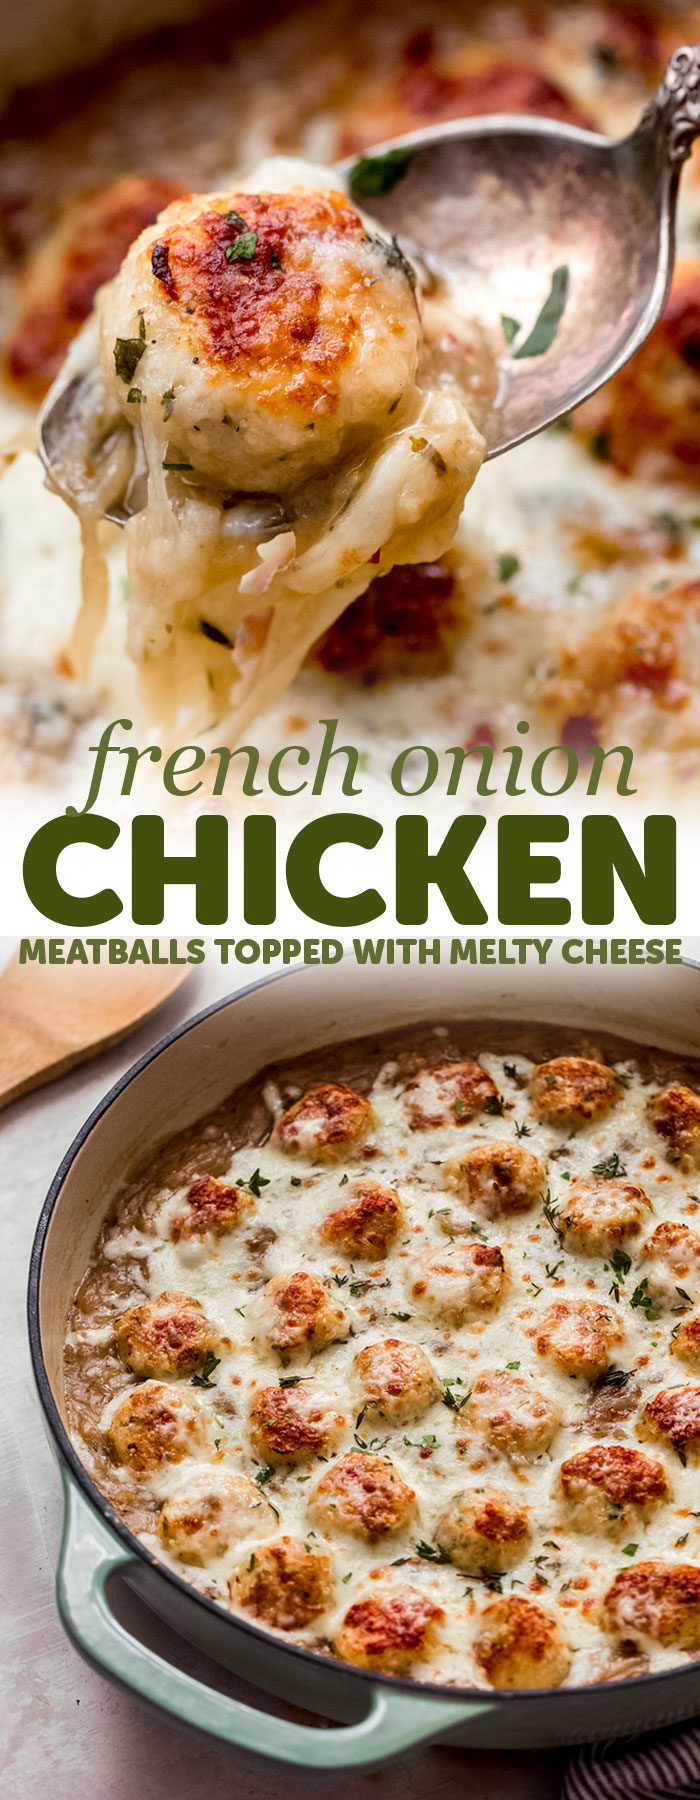 Comforting French Onion Chicken Meatballs - these meatballs are tender, nestled in a french onion gravy and topped with melty cheese! Sure to be a hit with the whole family! #chickenrecipes #chickendinner #chickenmeatballs #frenchonionmeatballs #chickeningravy #comfortfood | Littlespicejar.com